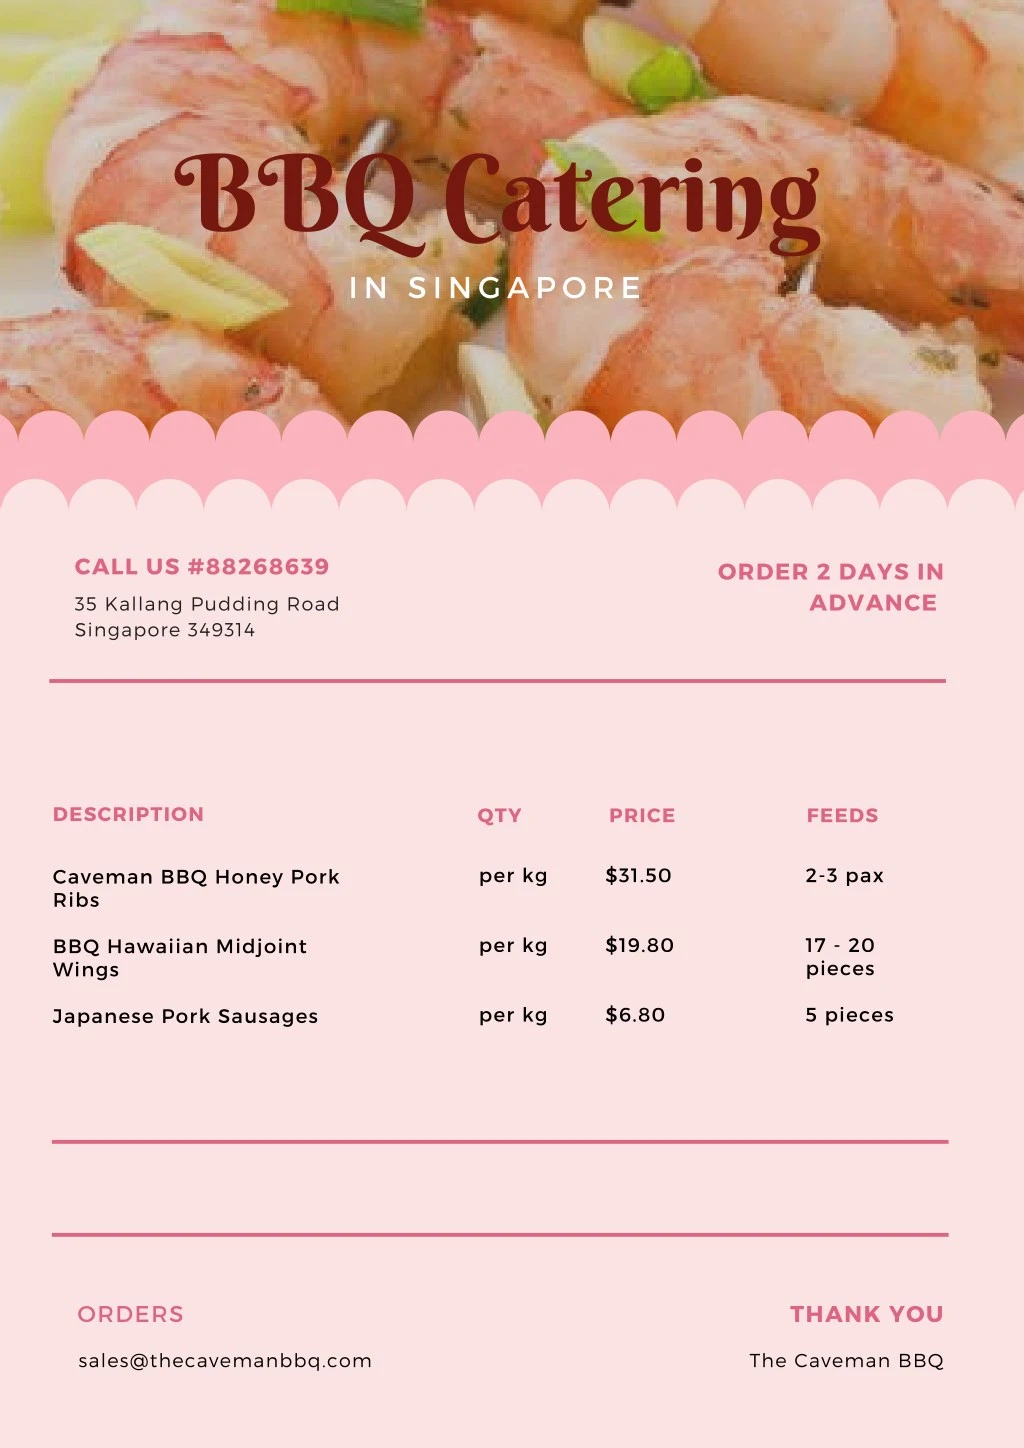 bbq catering in singapore